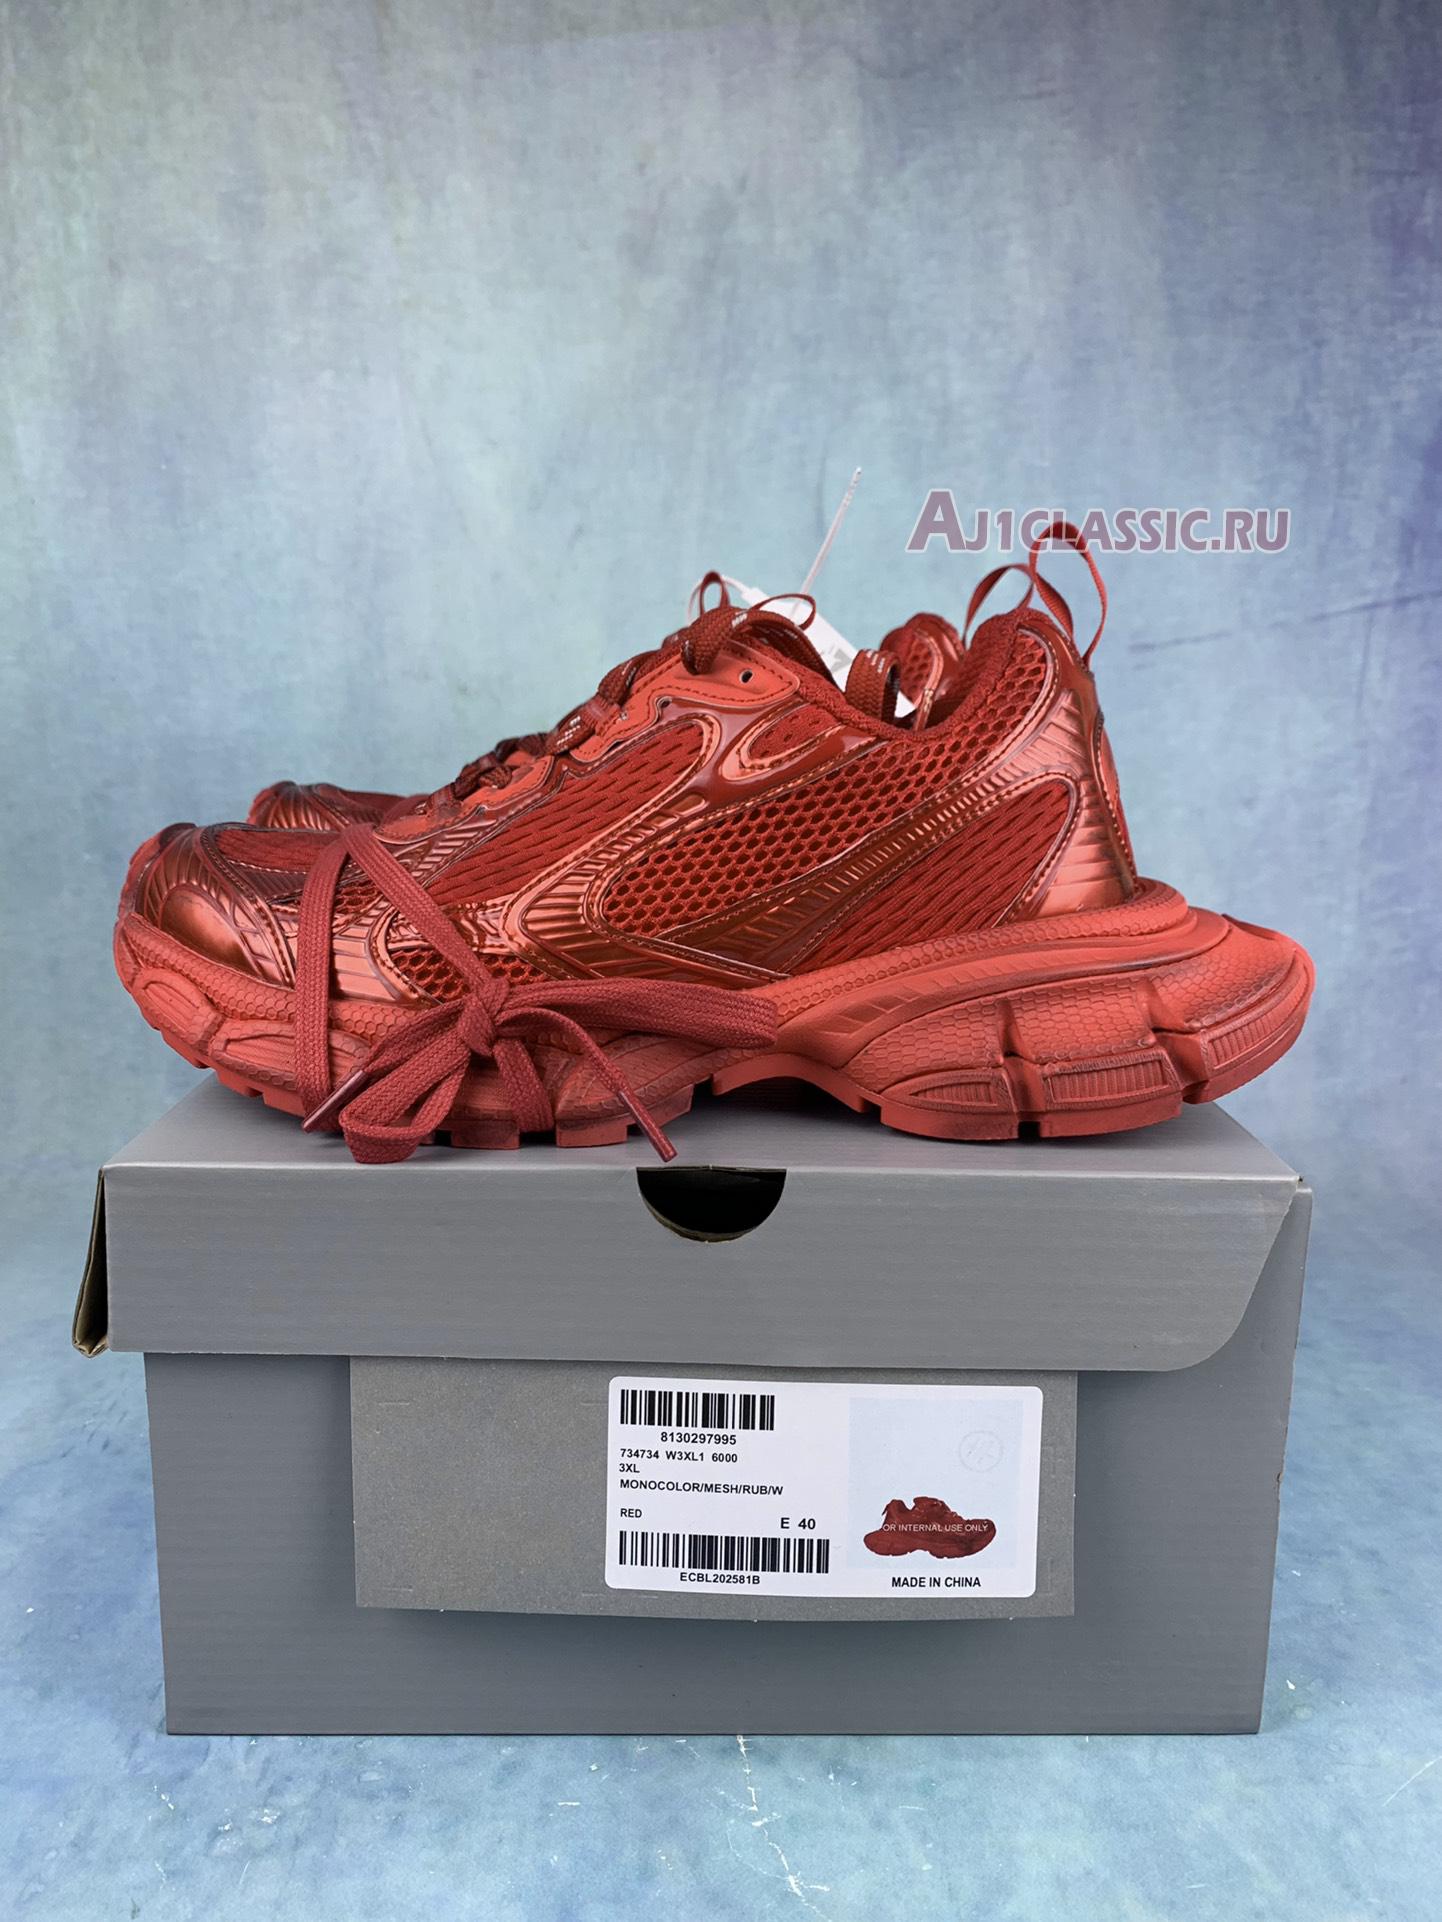 Balenciaga 3XL Sneaker Worn-Out - Red 734734 W3XL 16000 Red/Red Sneakers